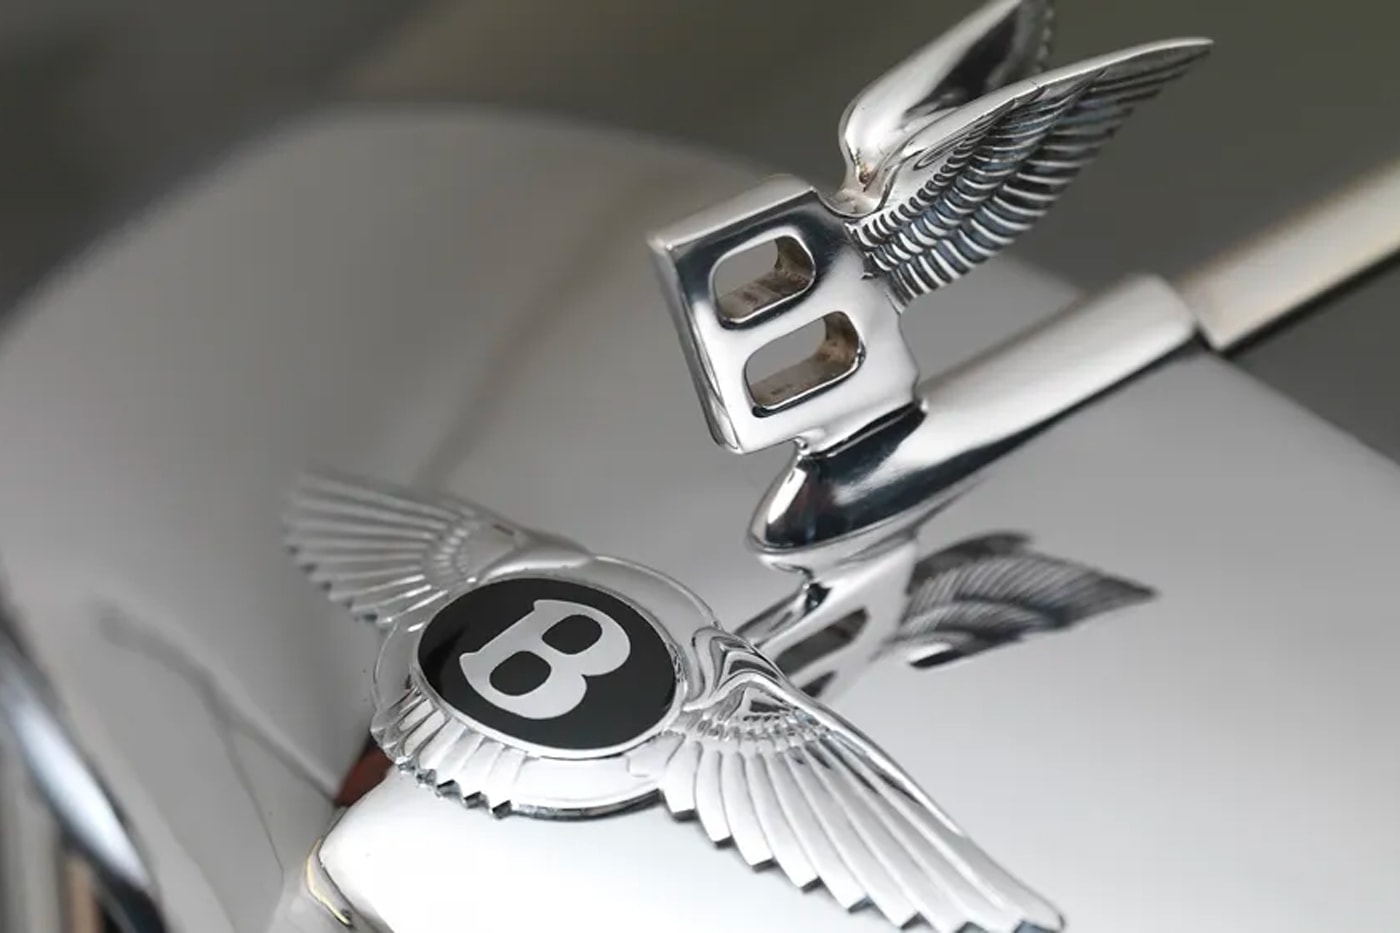 1956 Bentley S-Type Continental Owned by Prolific Photographer Helmut Newton Could Fetch $1.6 Million USD at Auction bonhams 